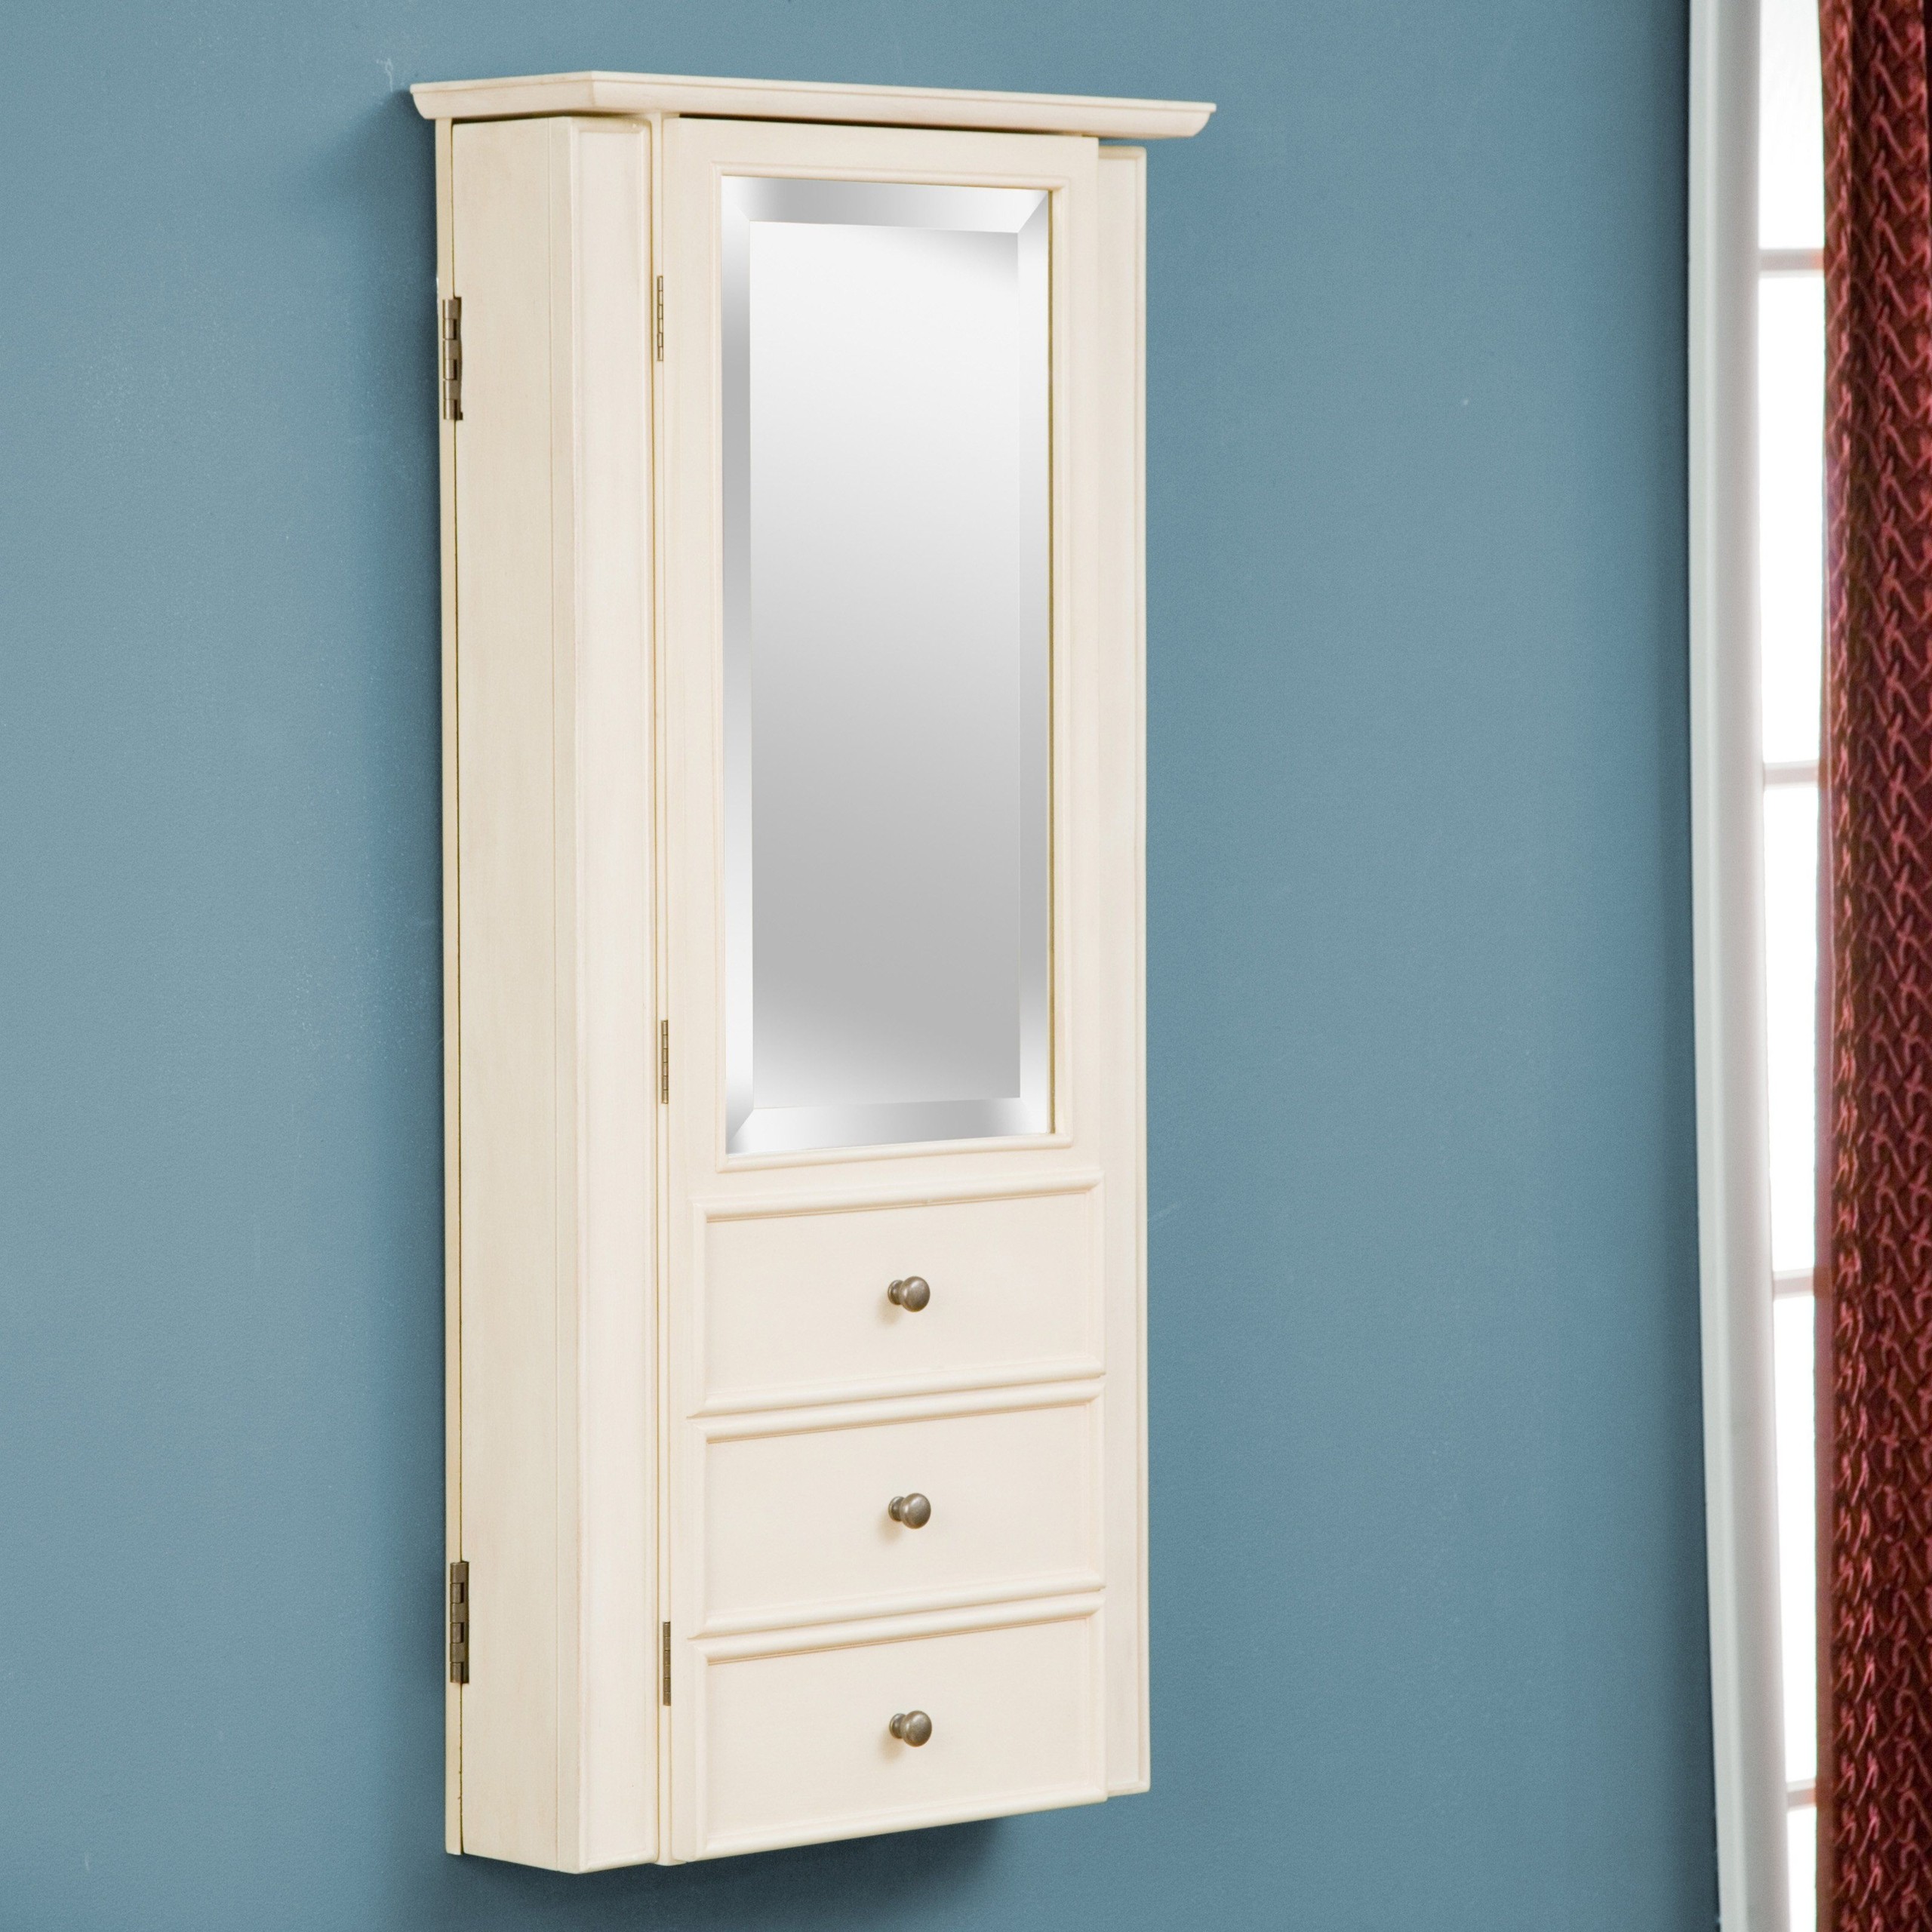 Wall mount jewelry armoire mirror white jewelry armoire